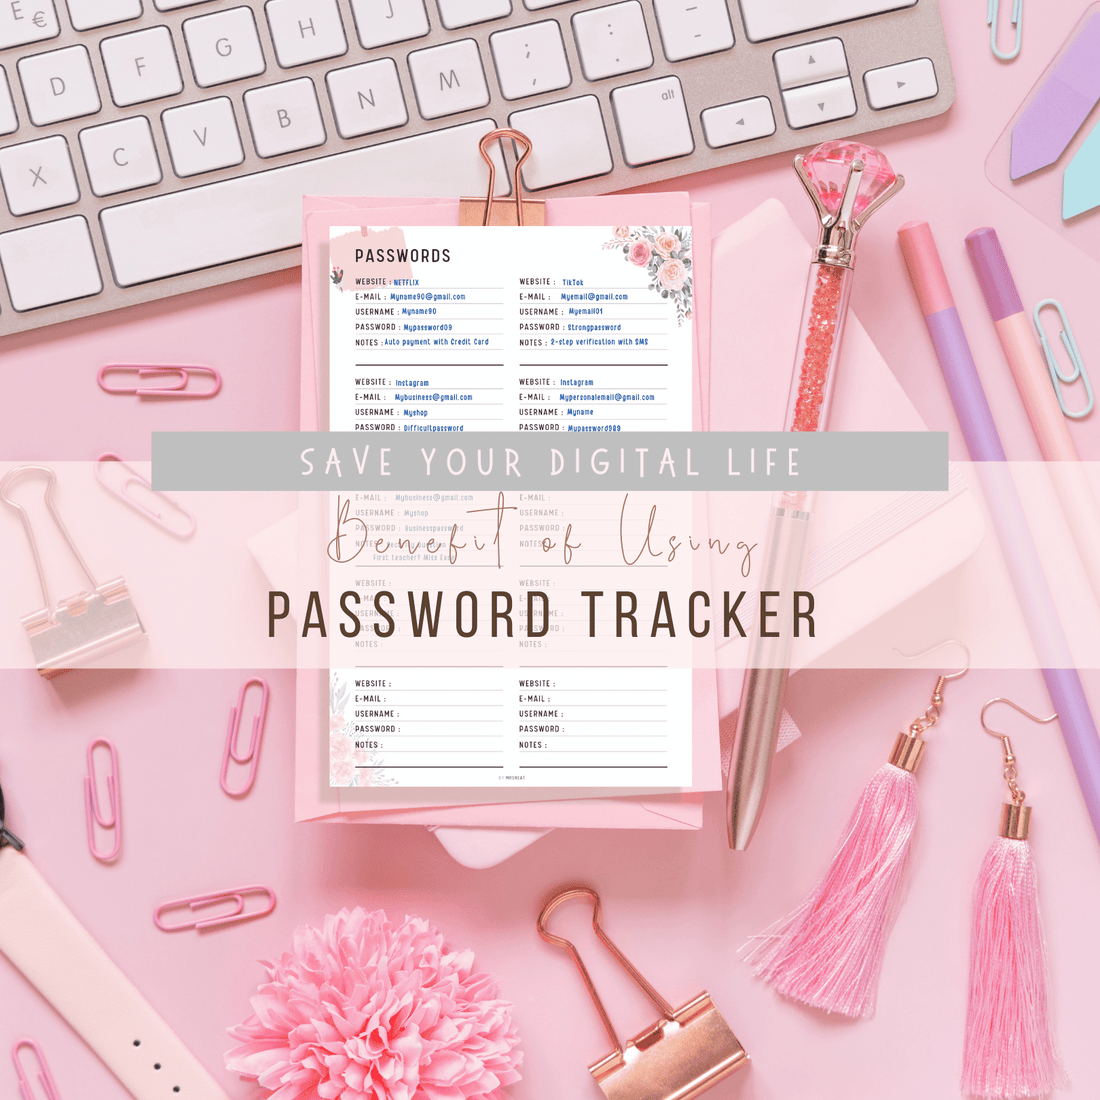 Save Your Digital Life, Benefit of Using Password Tracker